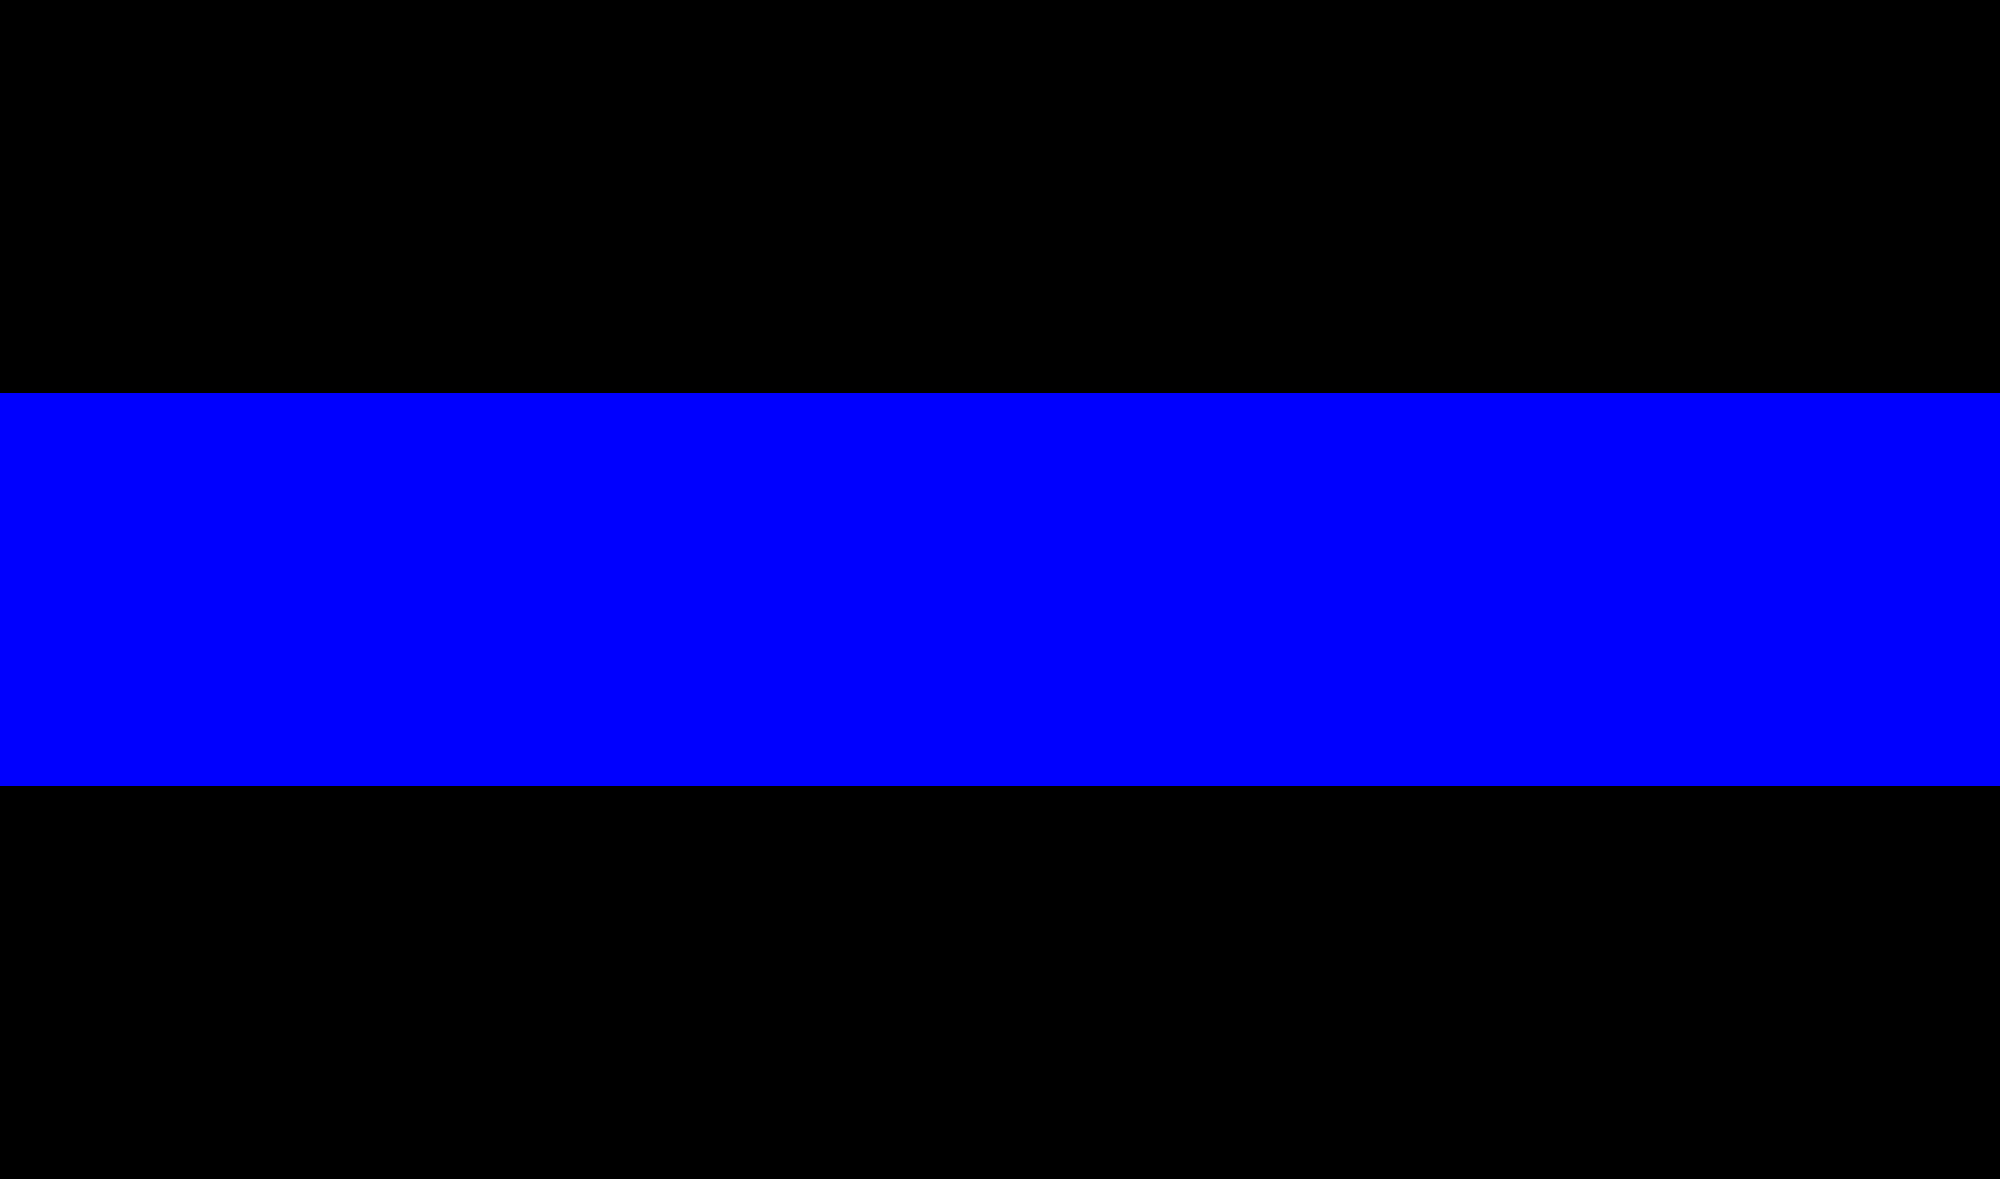 Current The Thin Blue Line A Flag Used By Police Officers In North